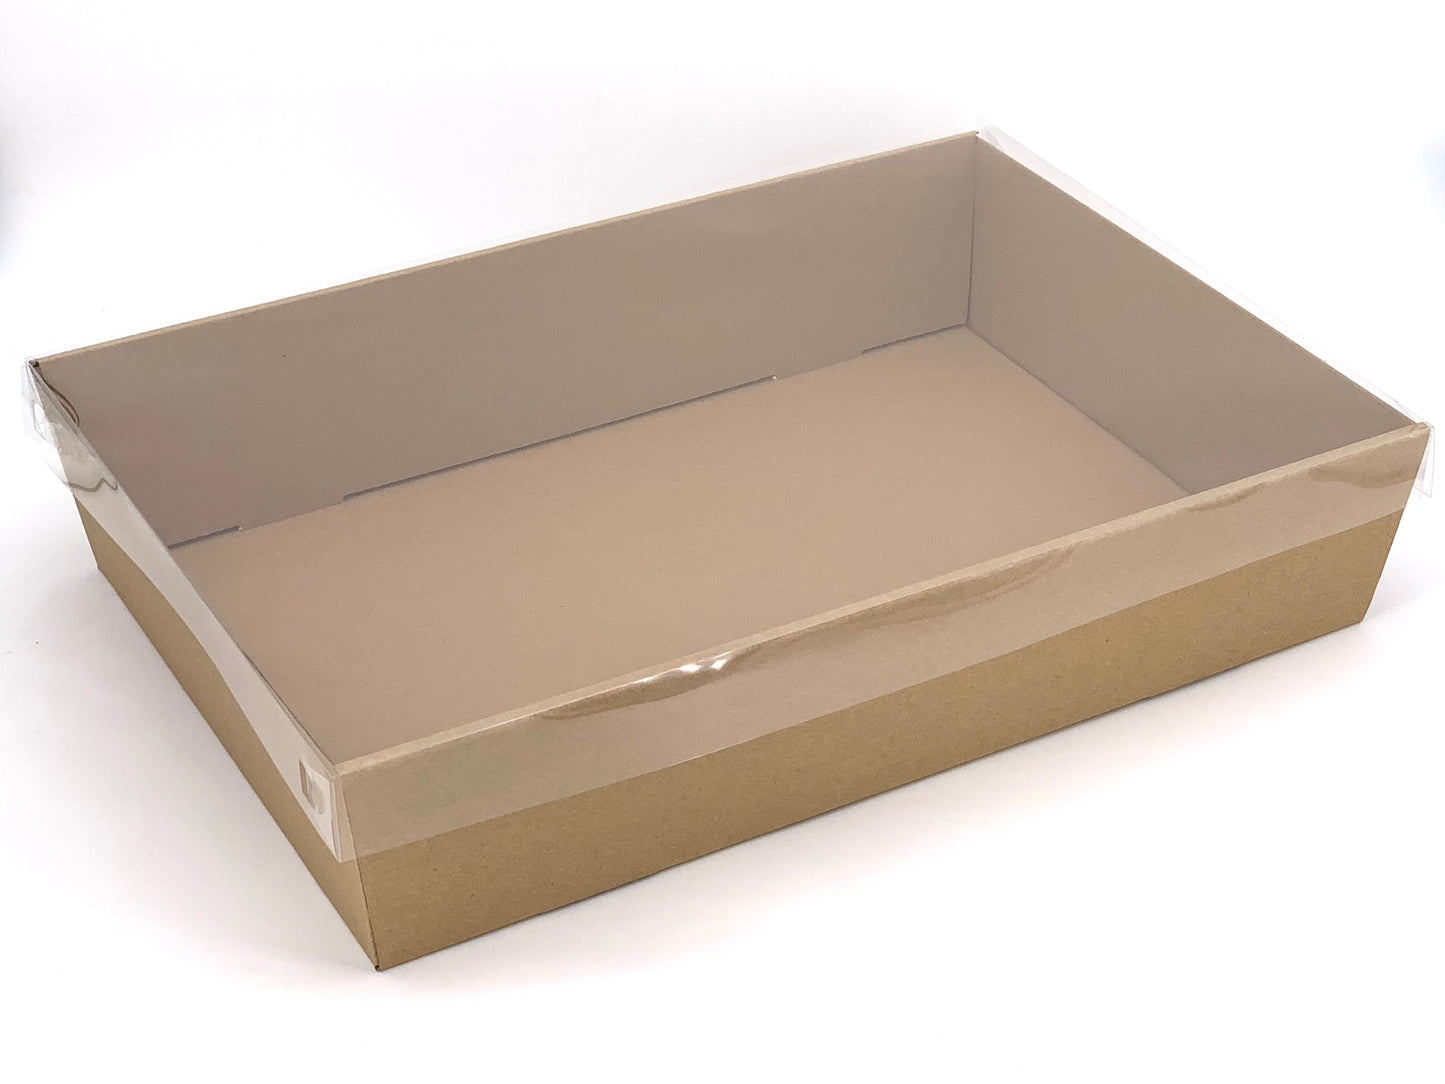 Brown Catering Tray - Medium 50mm High